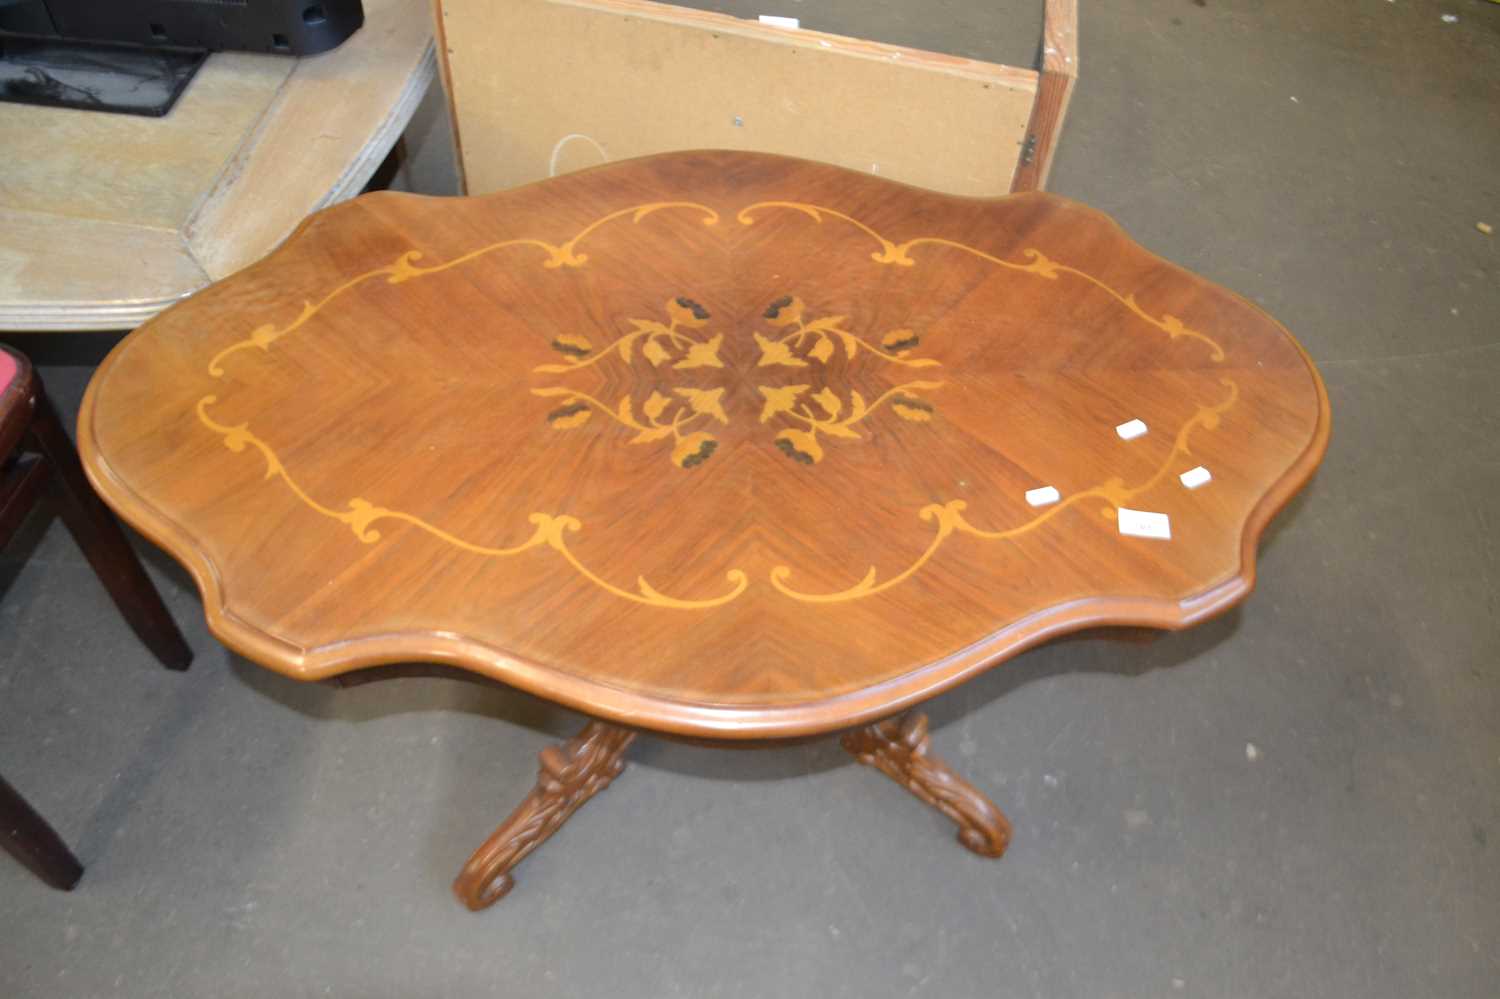 Reproduction low centre table